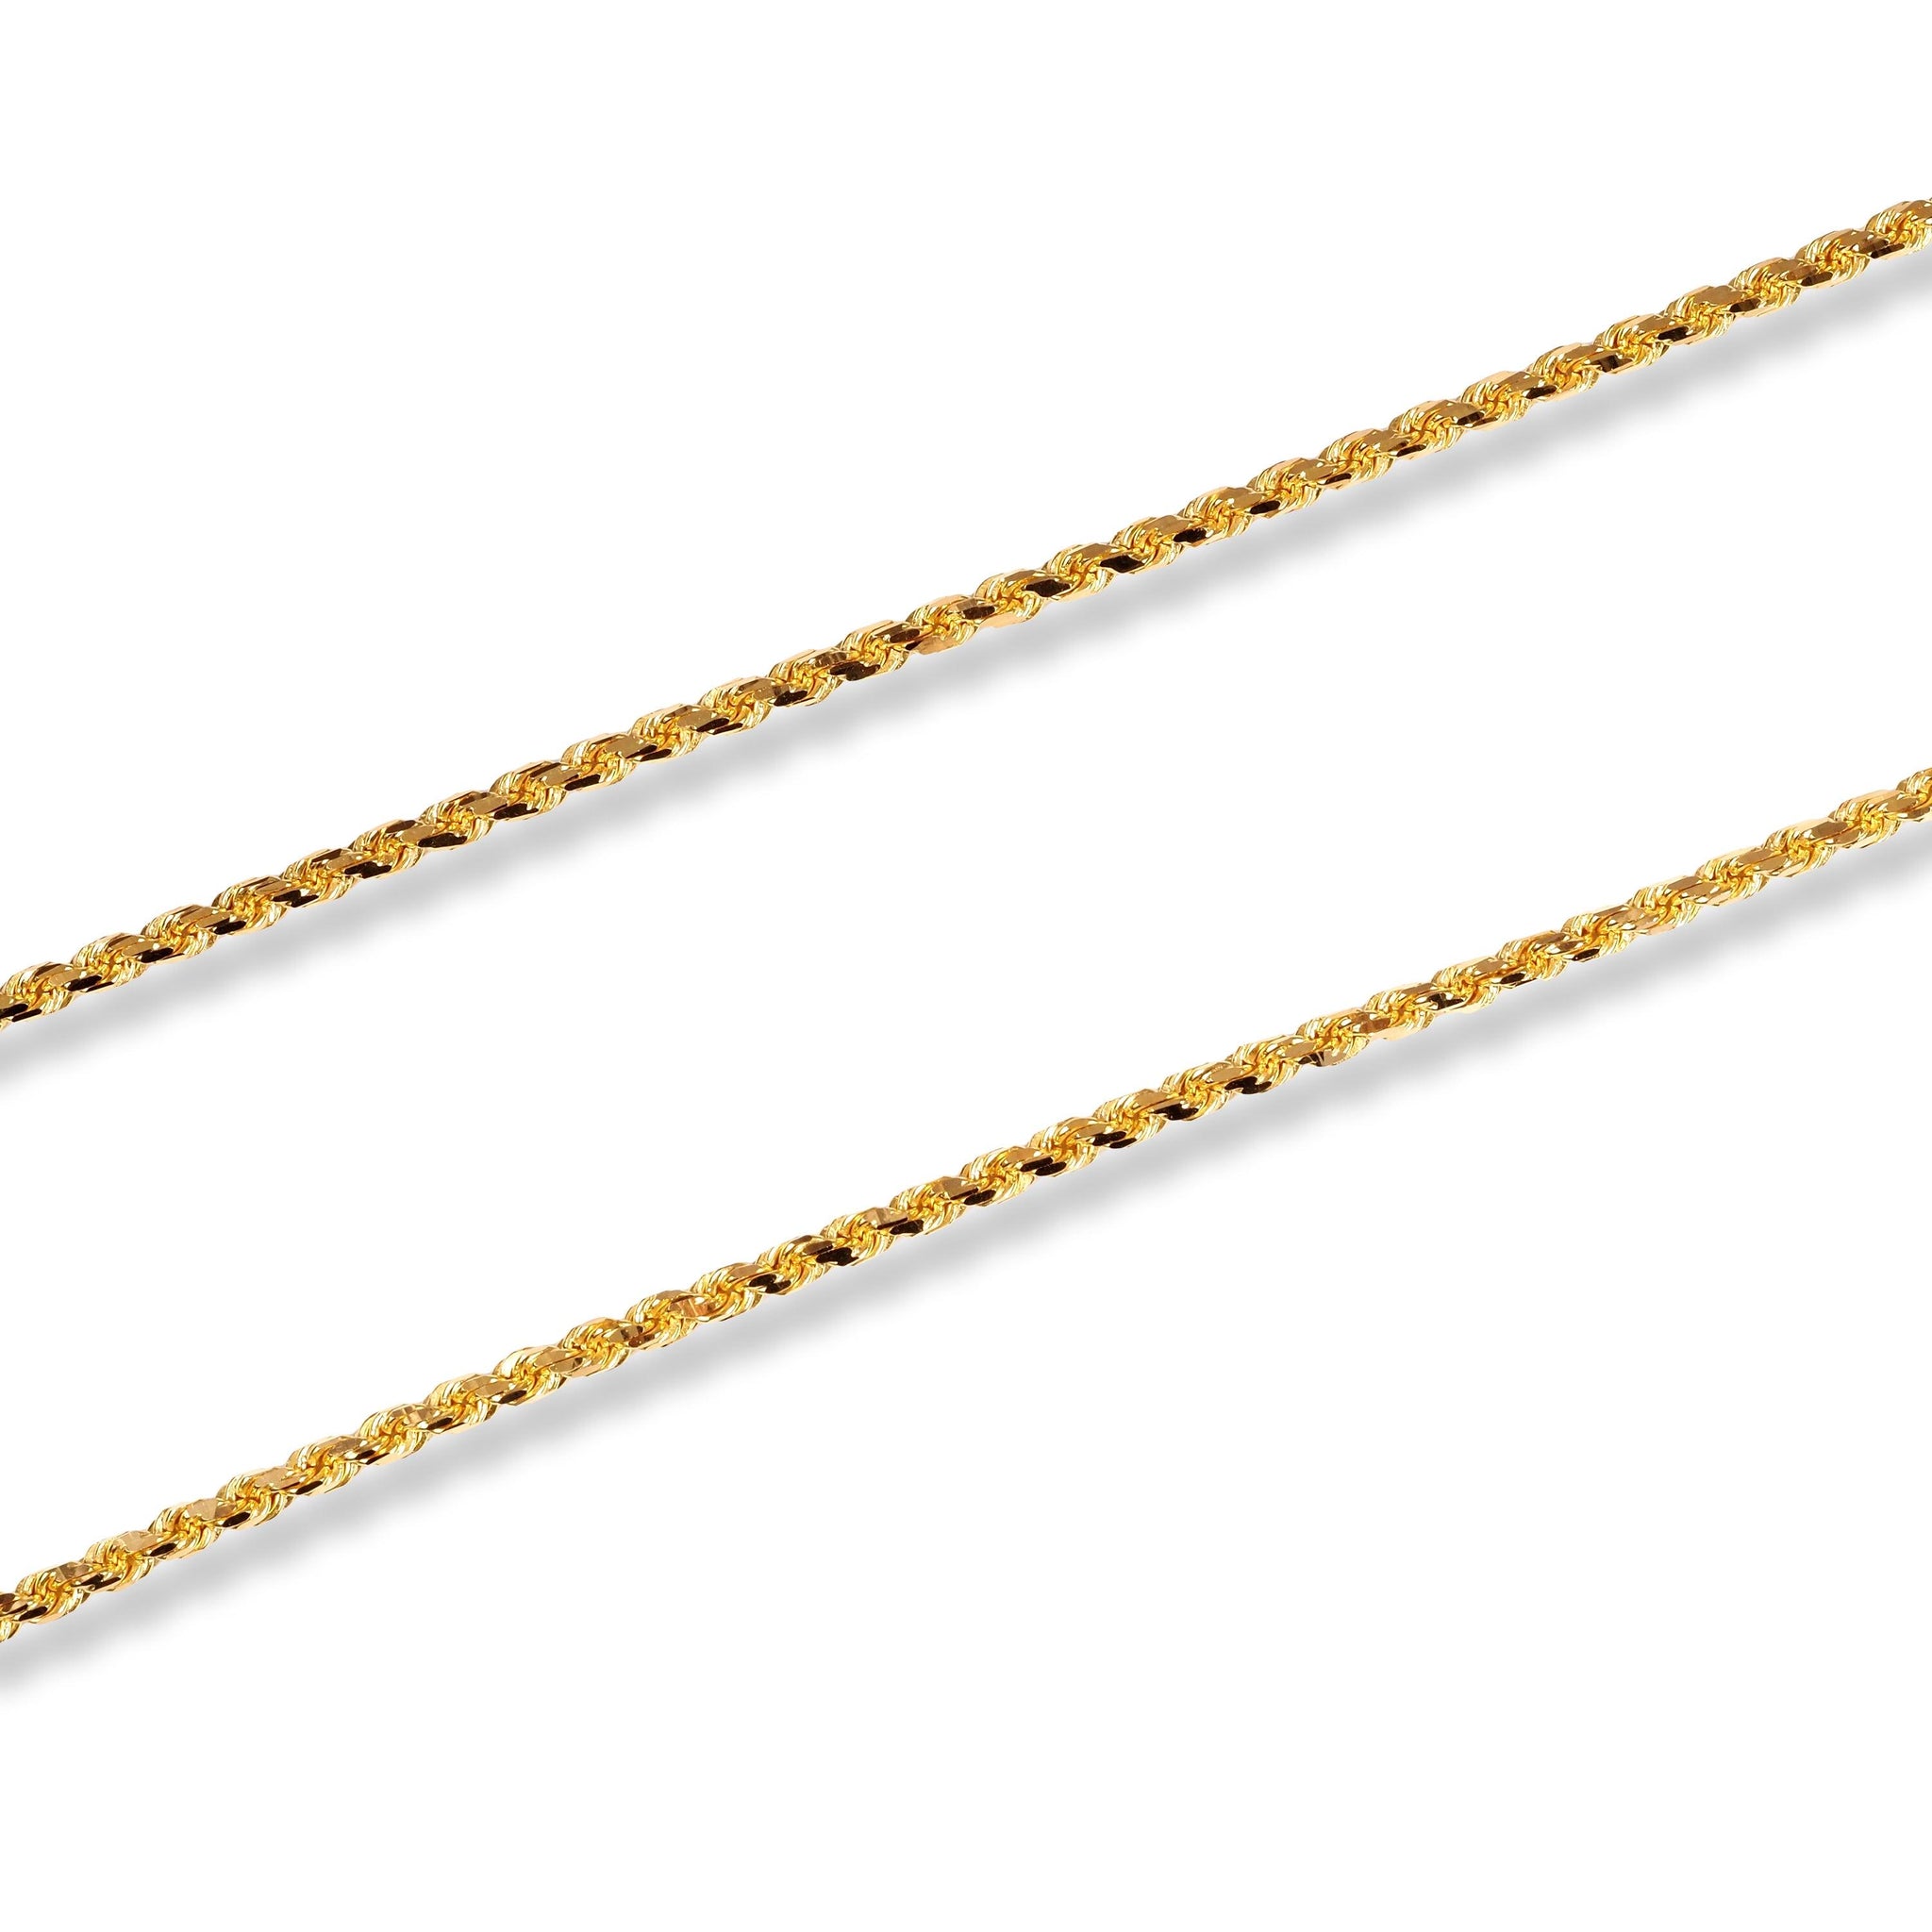 22ct Gold Filed Solid Rope Chain with S Clasp C-1216